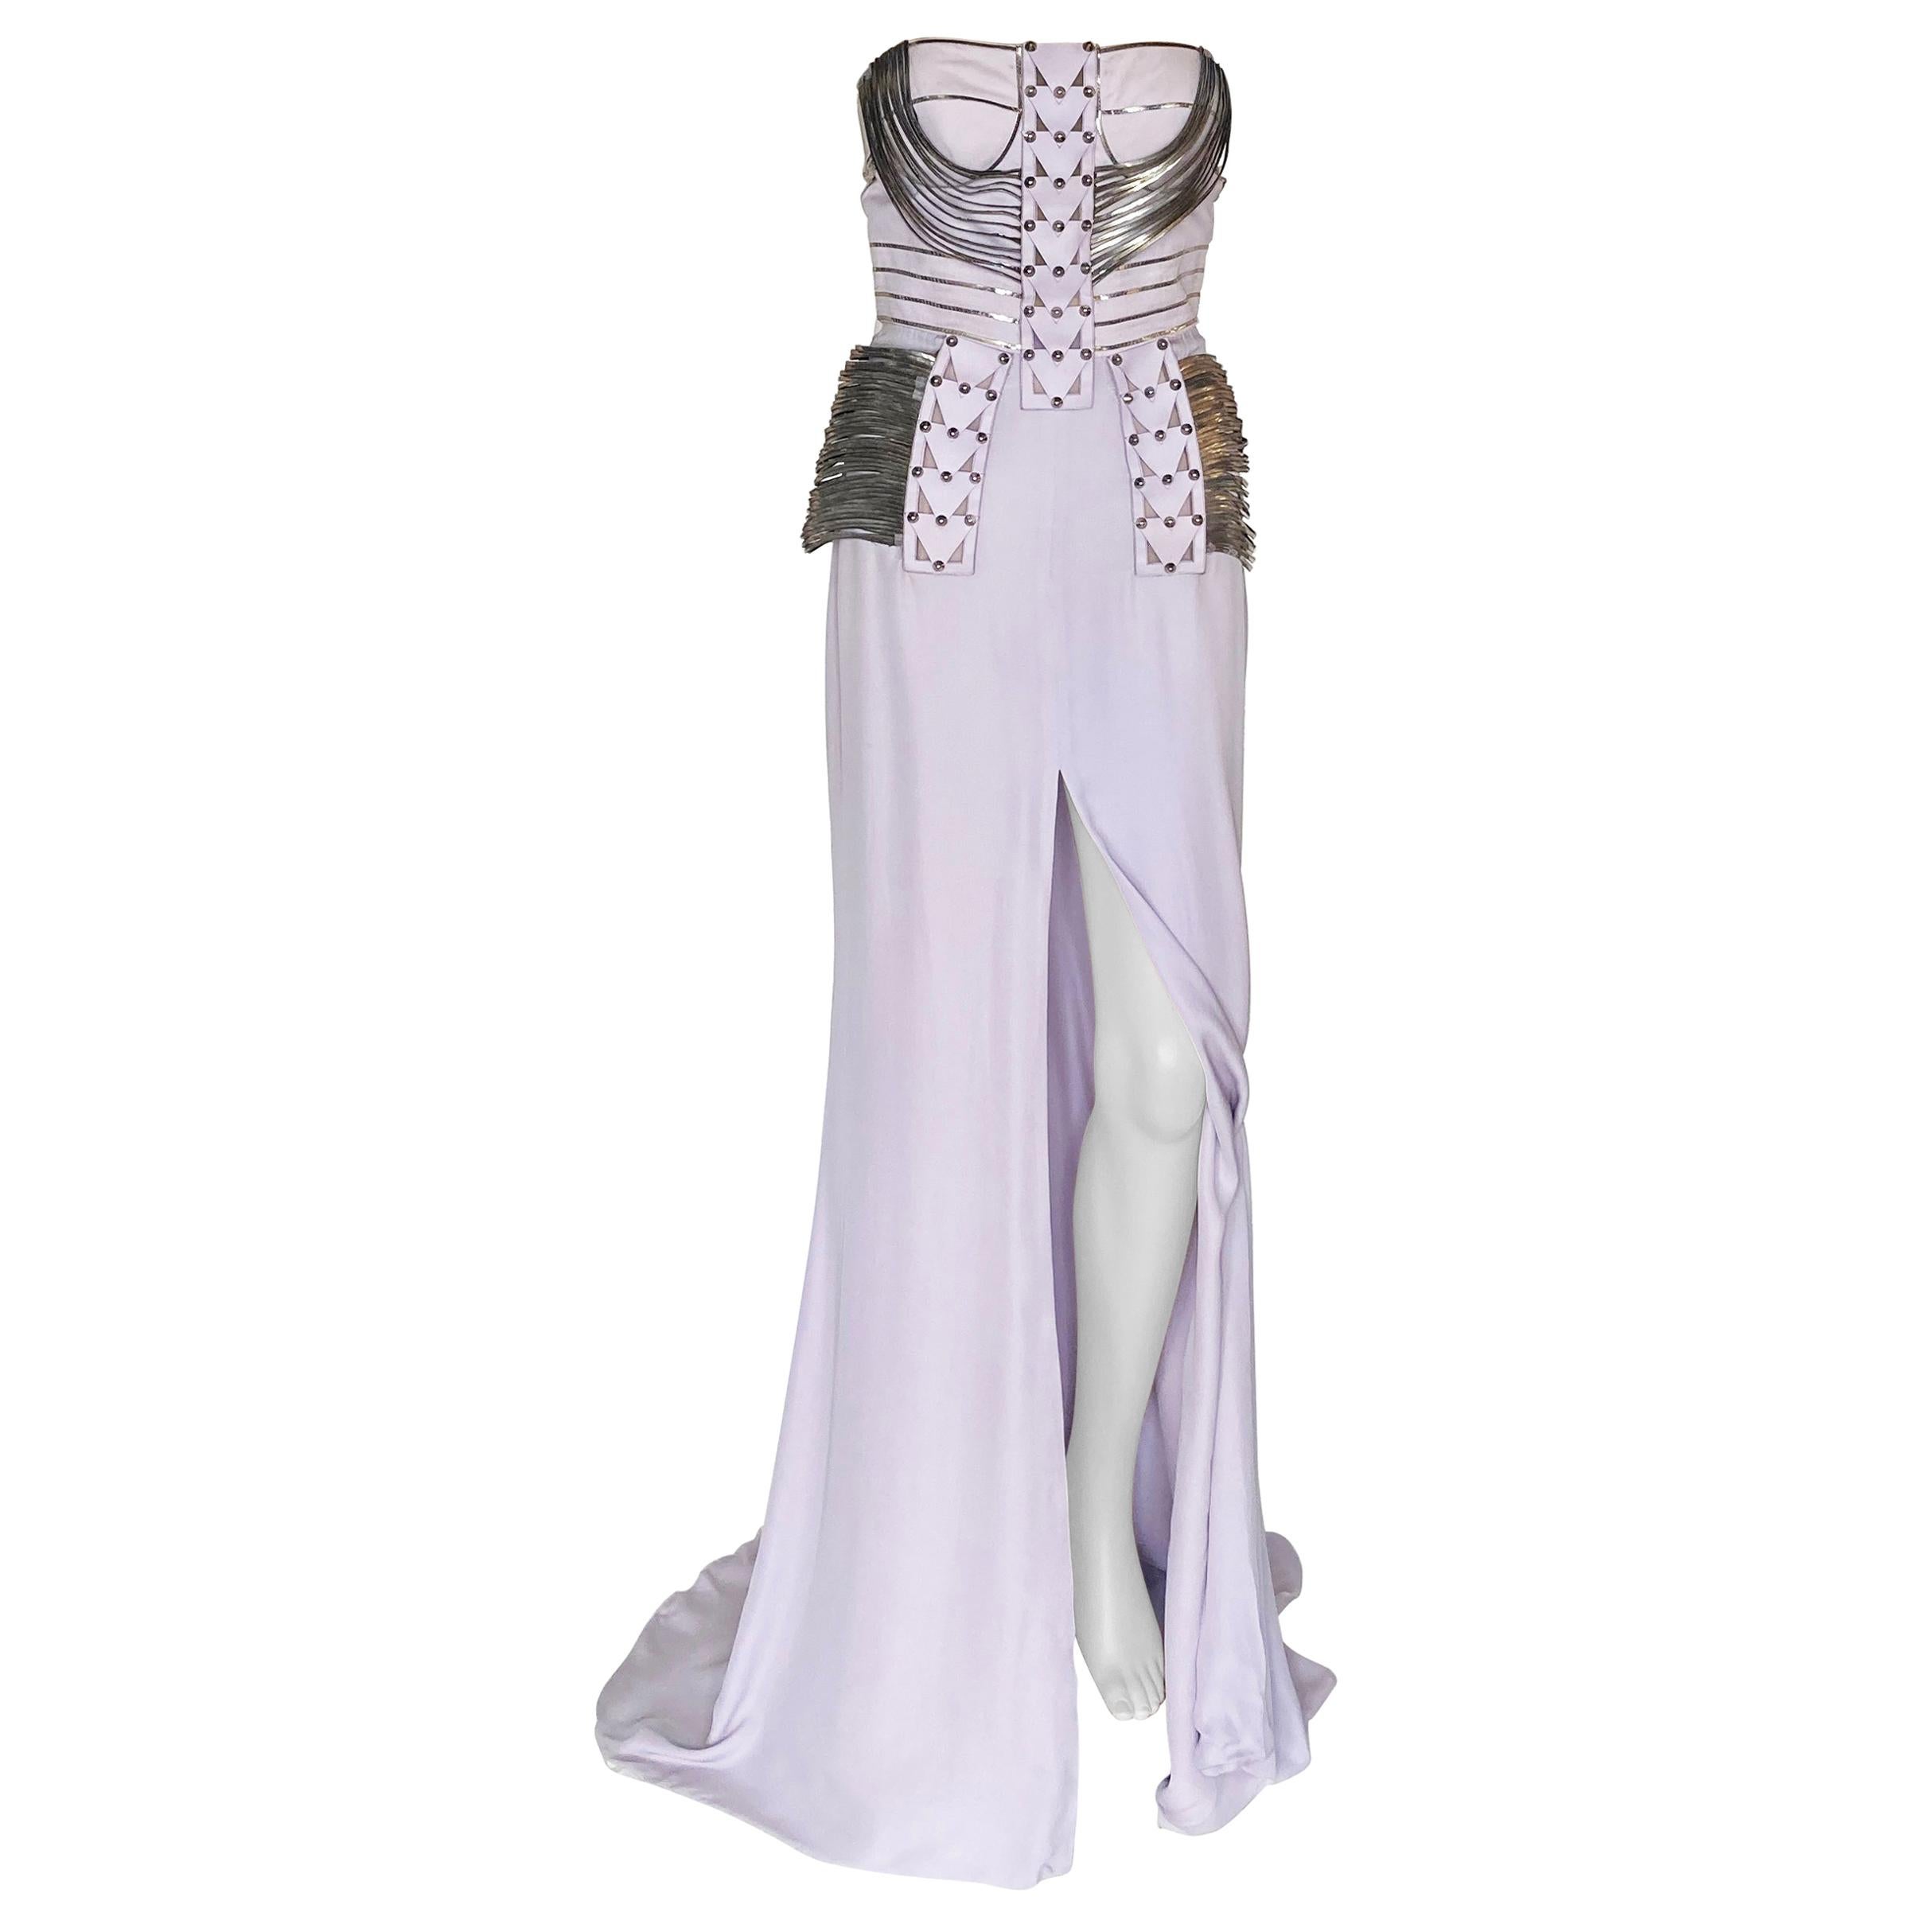 S/S 2010 L# 47 VERSACE EMBELLISHED LONG DRESS GOWN 40 - 4 as seen on DONATELLA For Sale